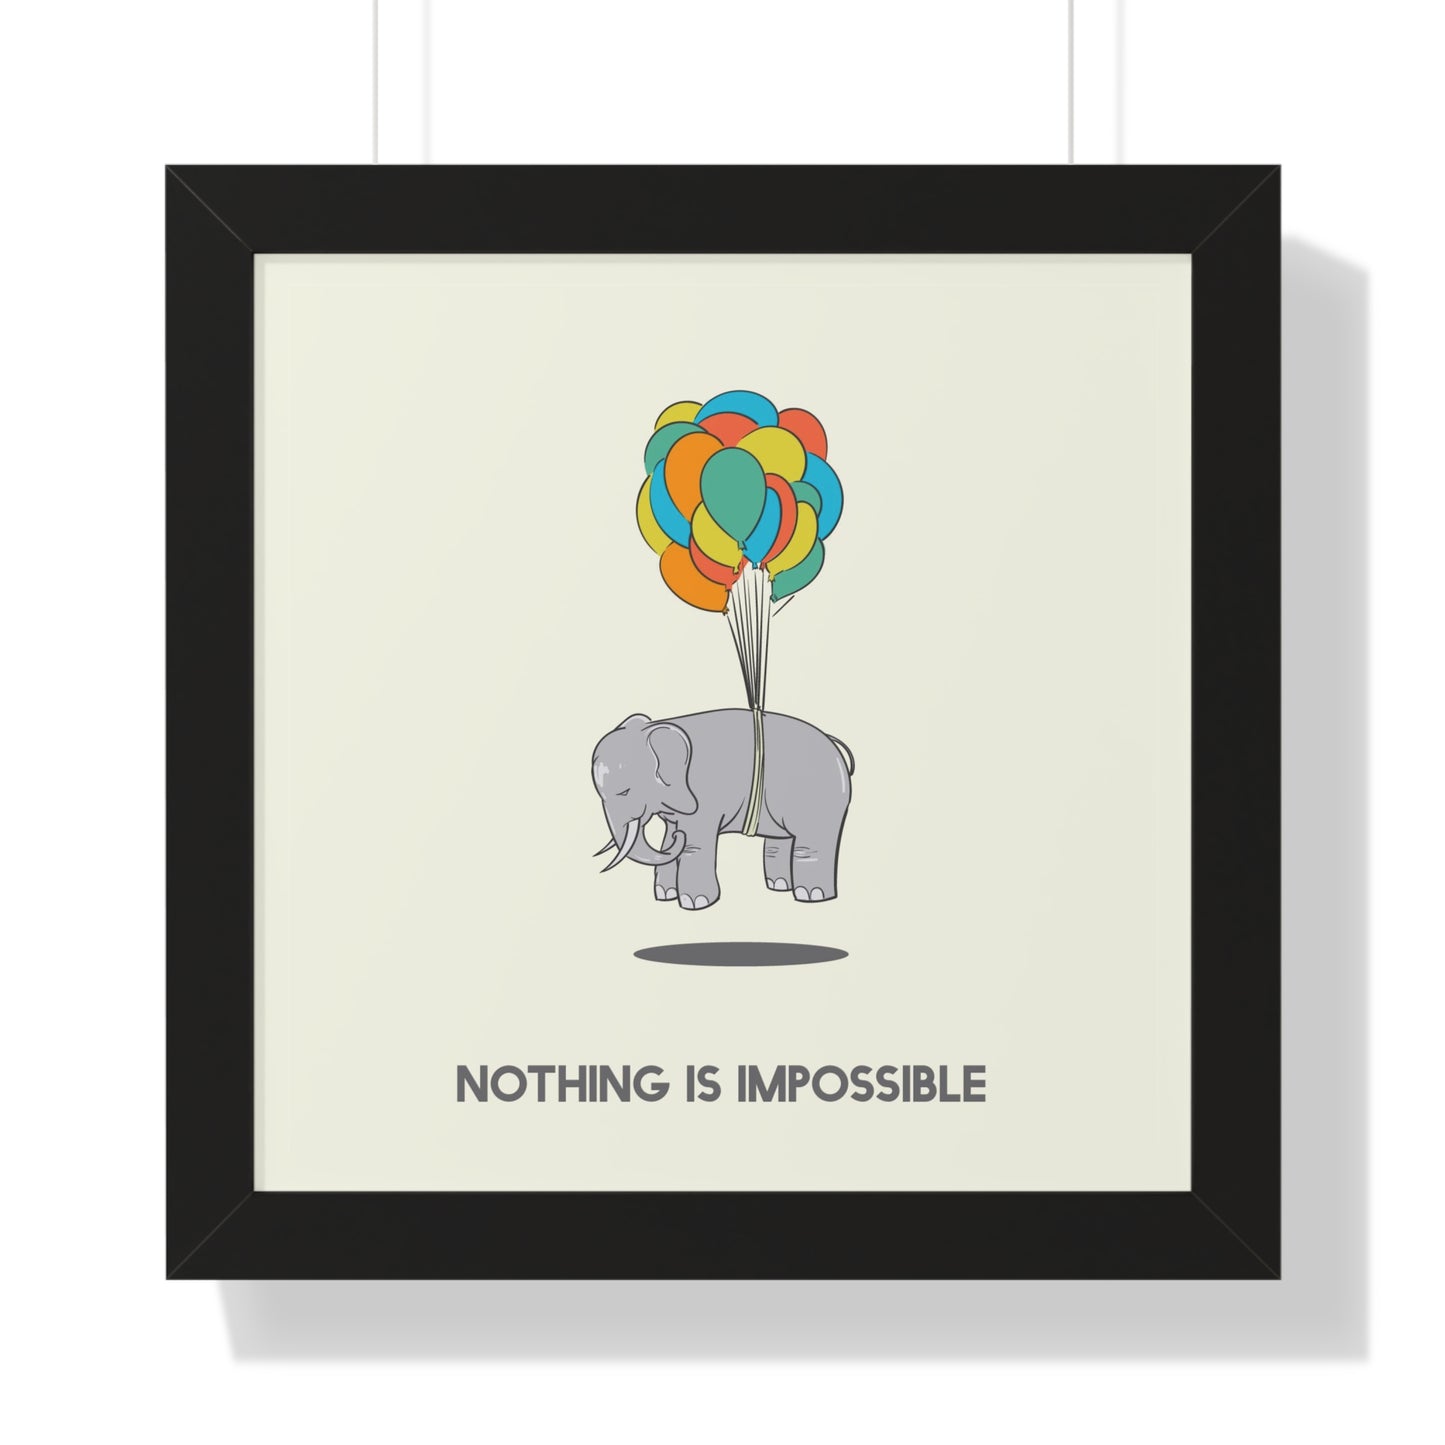 Nothing is Impossible Poster Frame